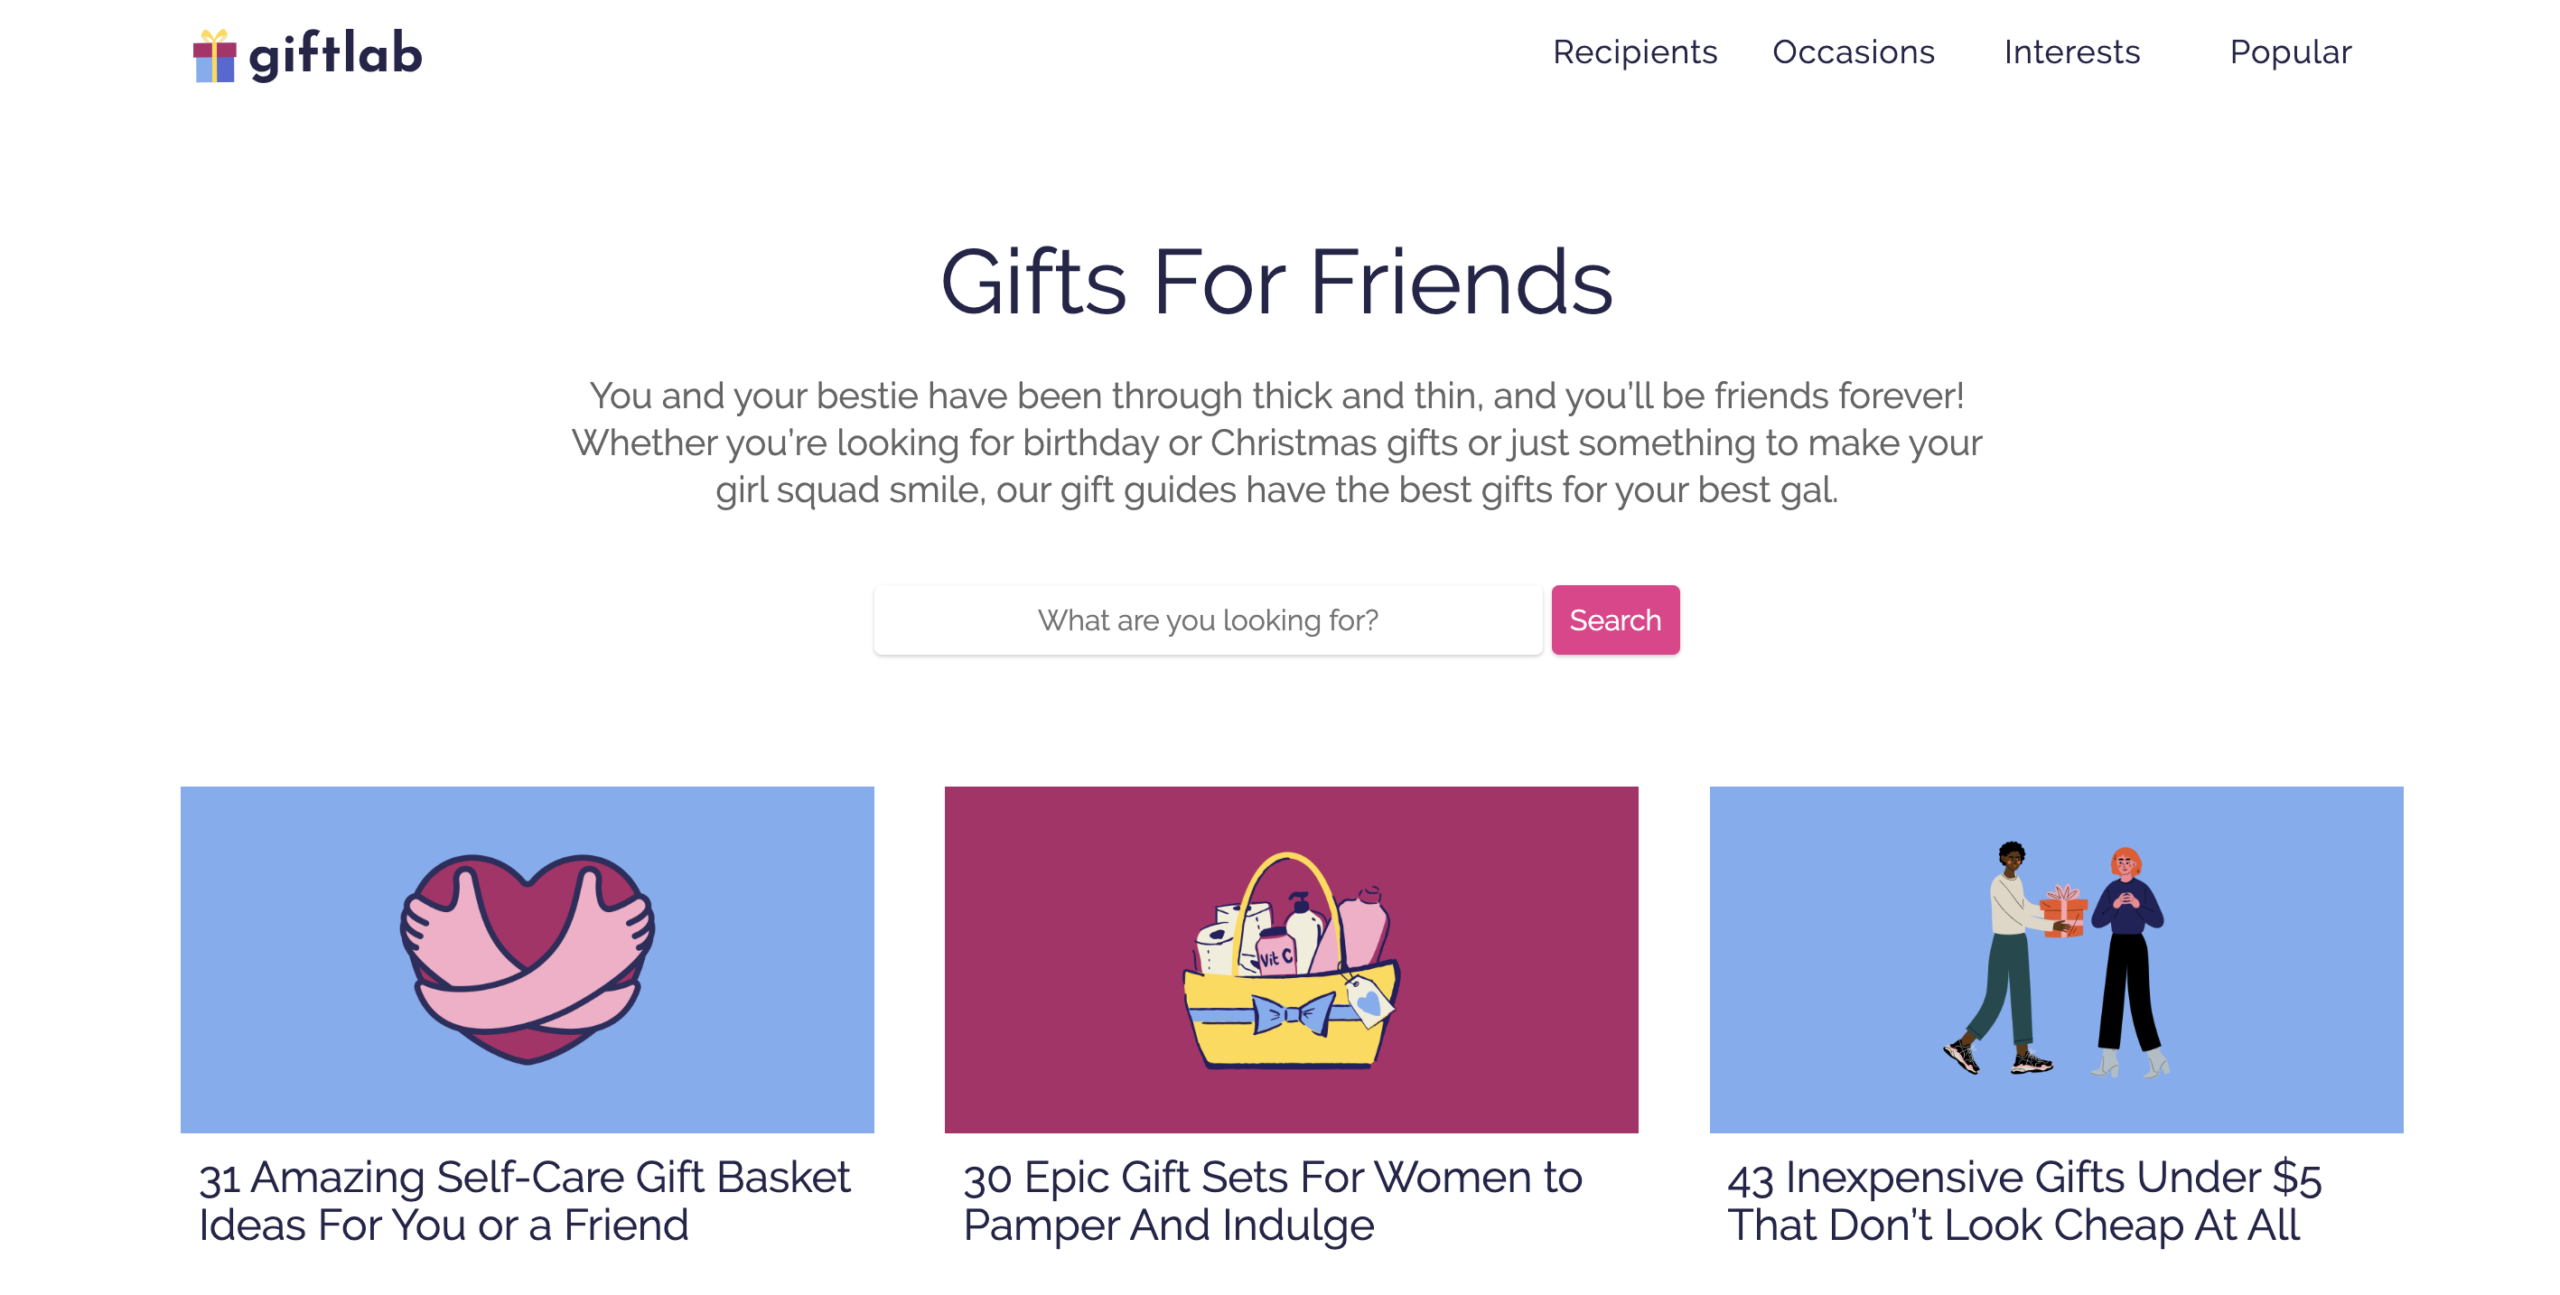 giftlab category page for friend gifts as an amazon affiliate website to model